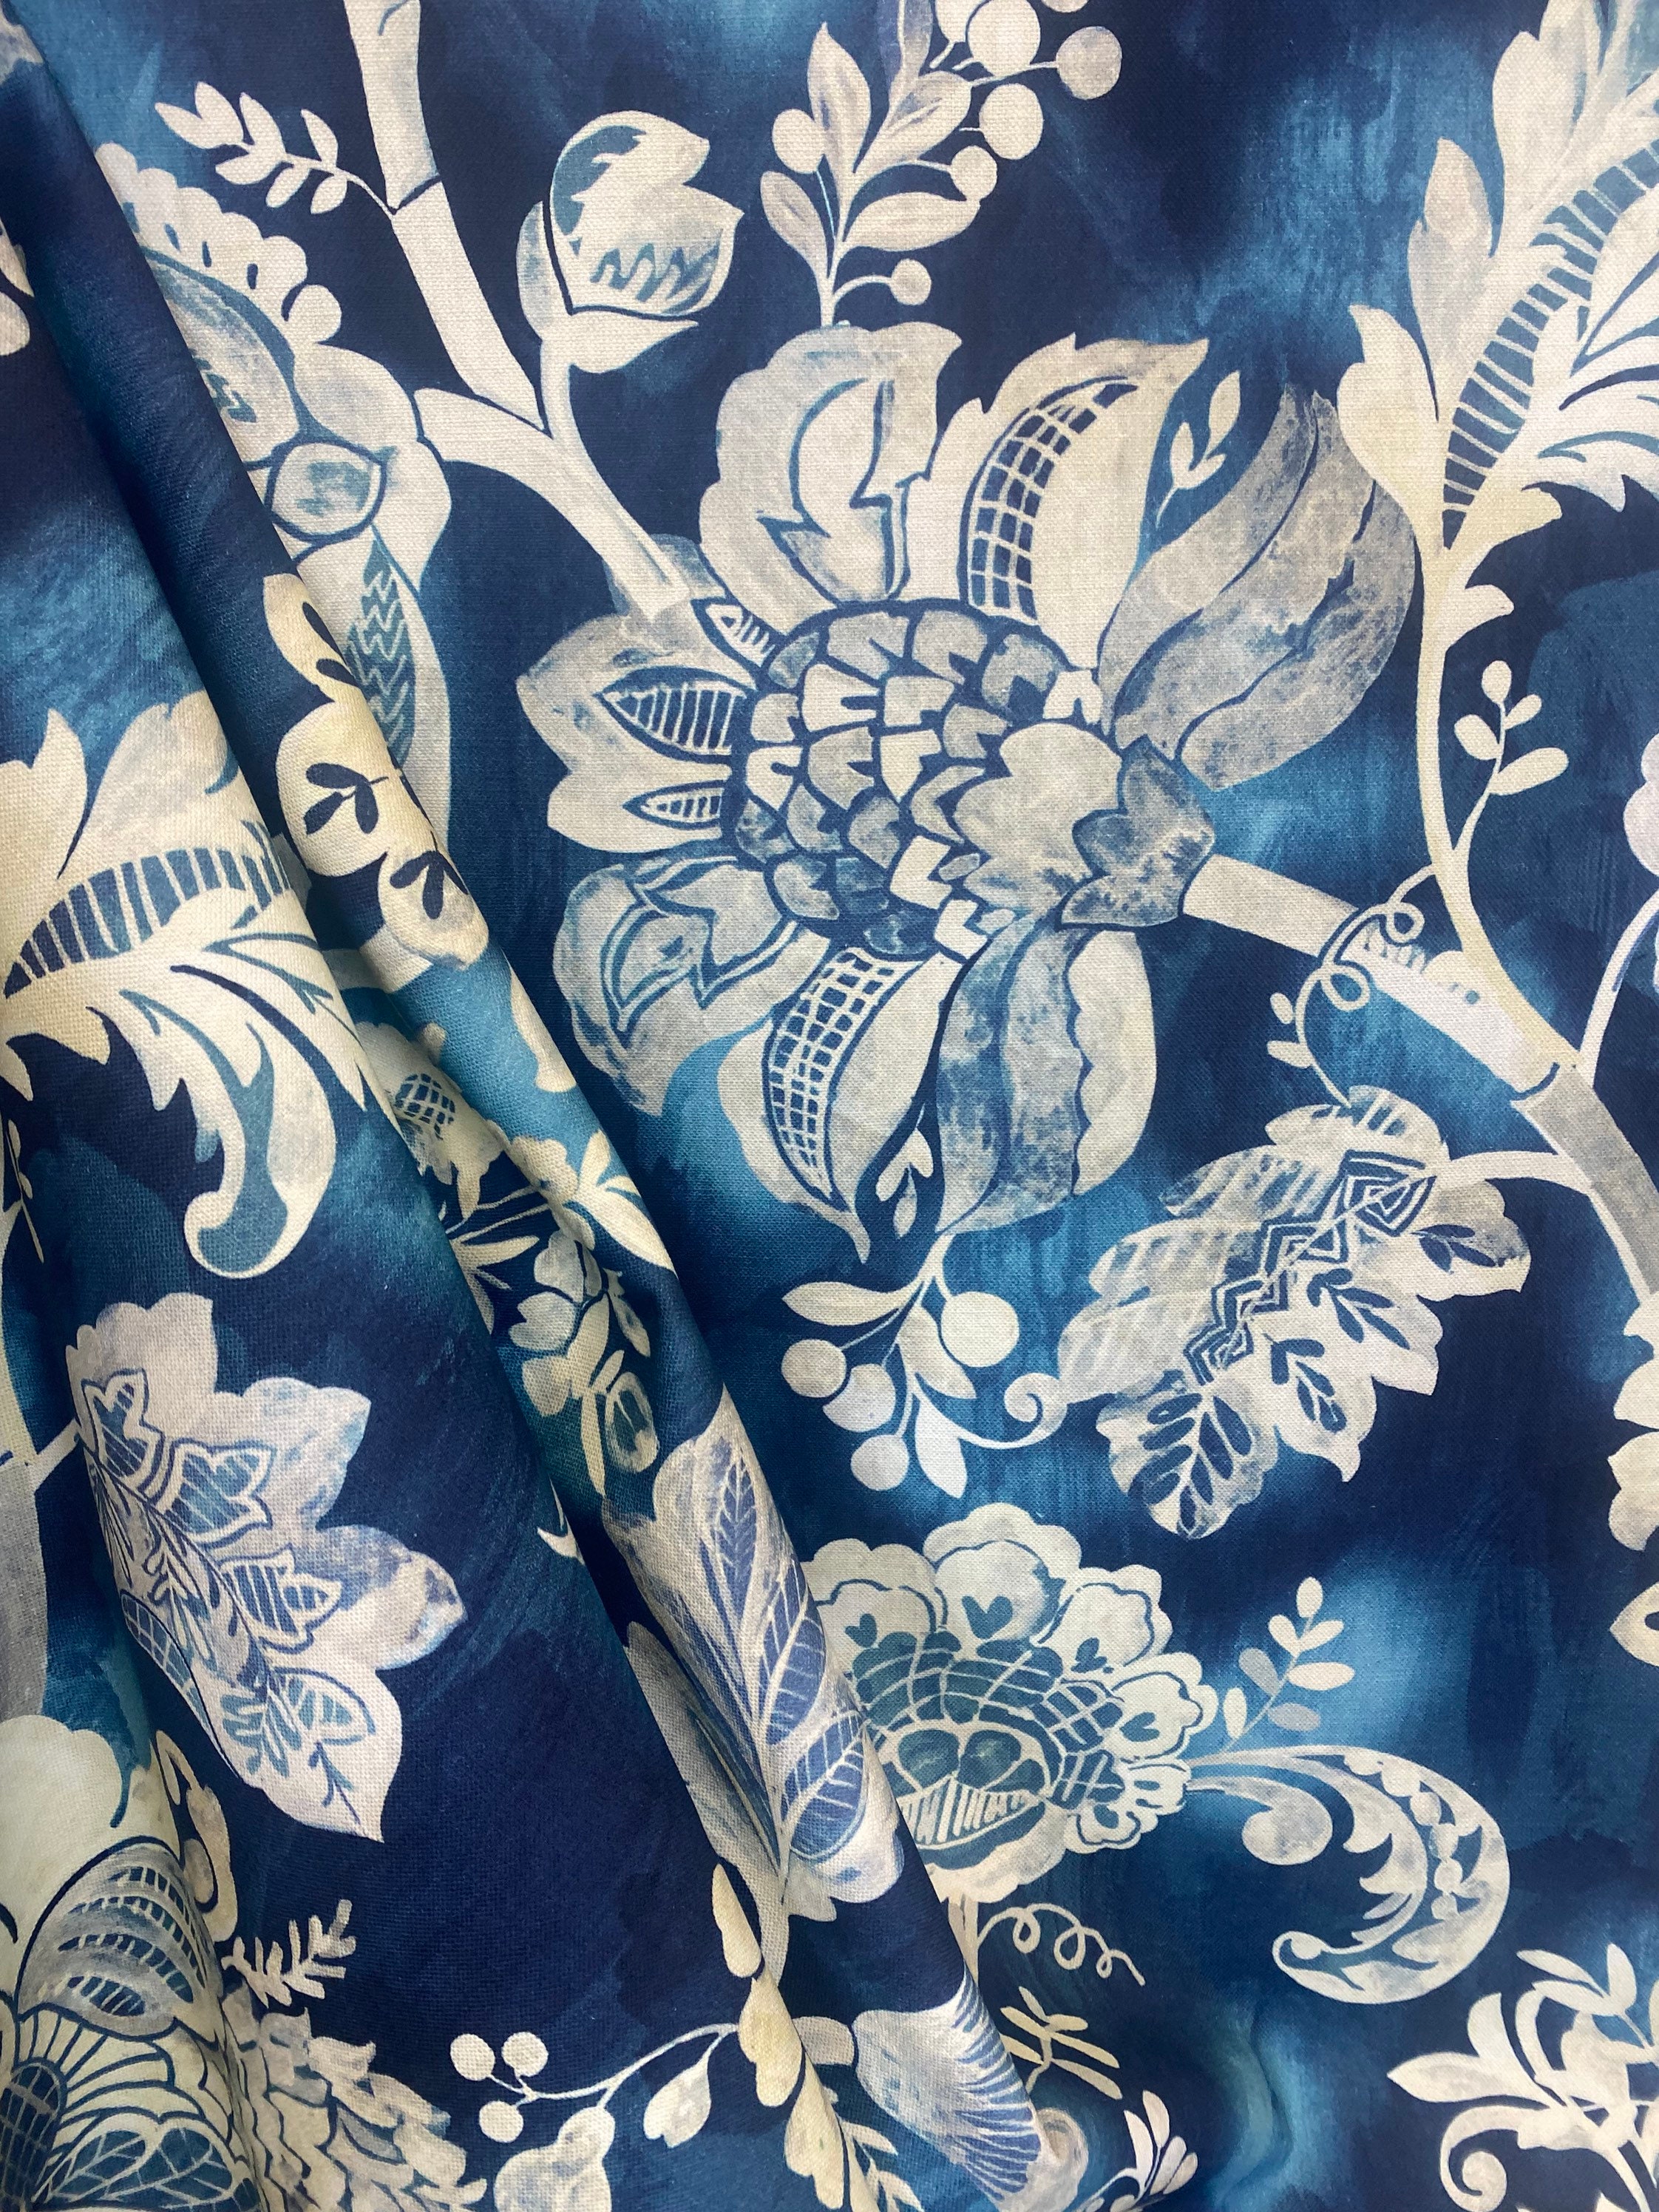 Bohemian Design Home Decor Fabric | Cobalt Blue / Off White | Curtains /  Light Upholstery | 100% Cotton | 54 Wide | By the Yard